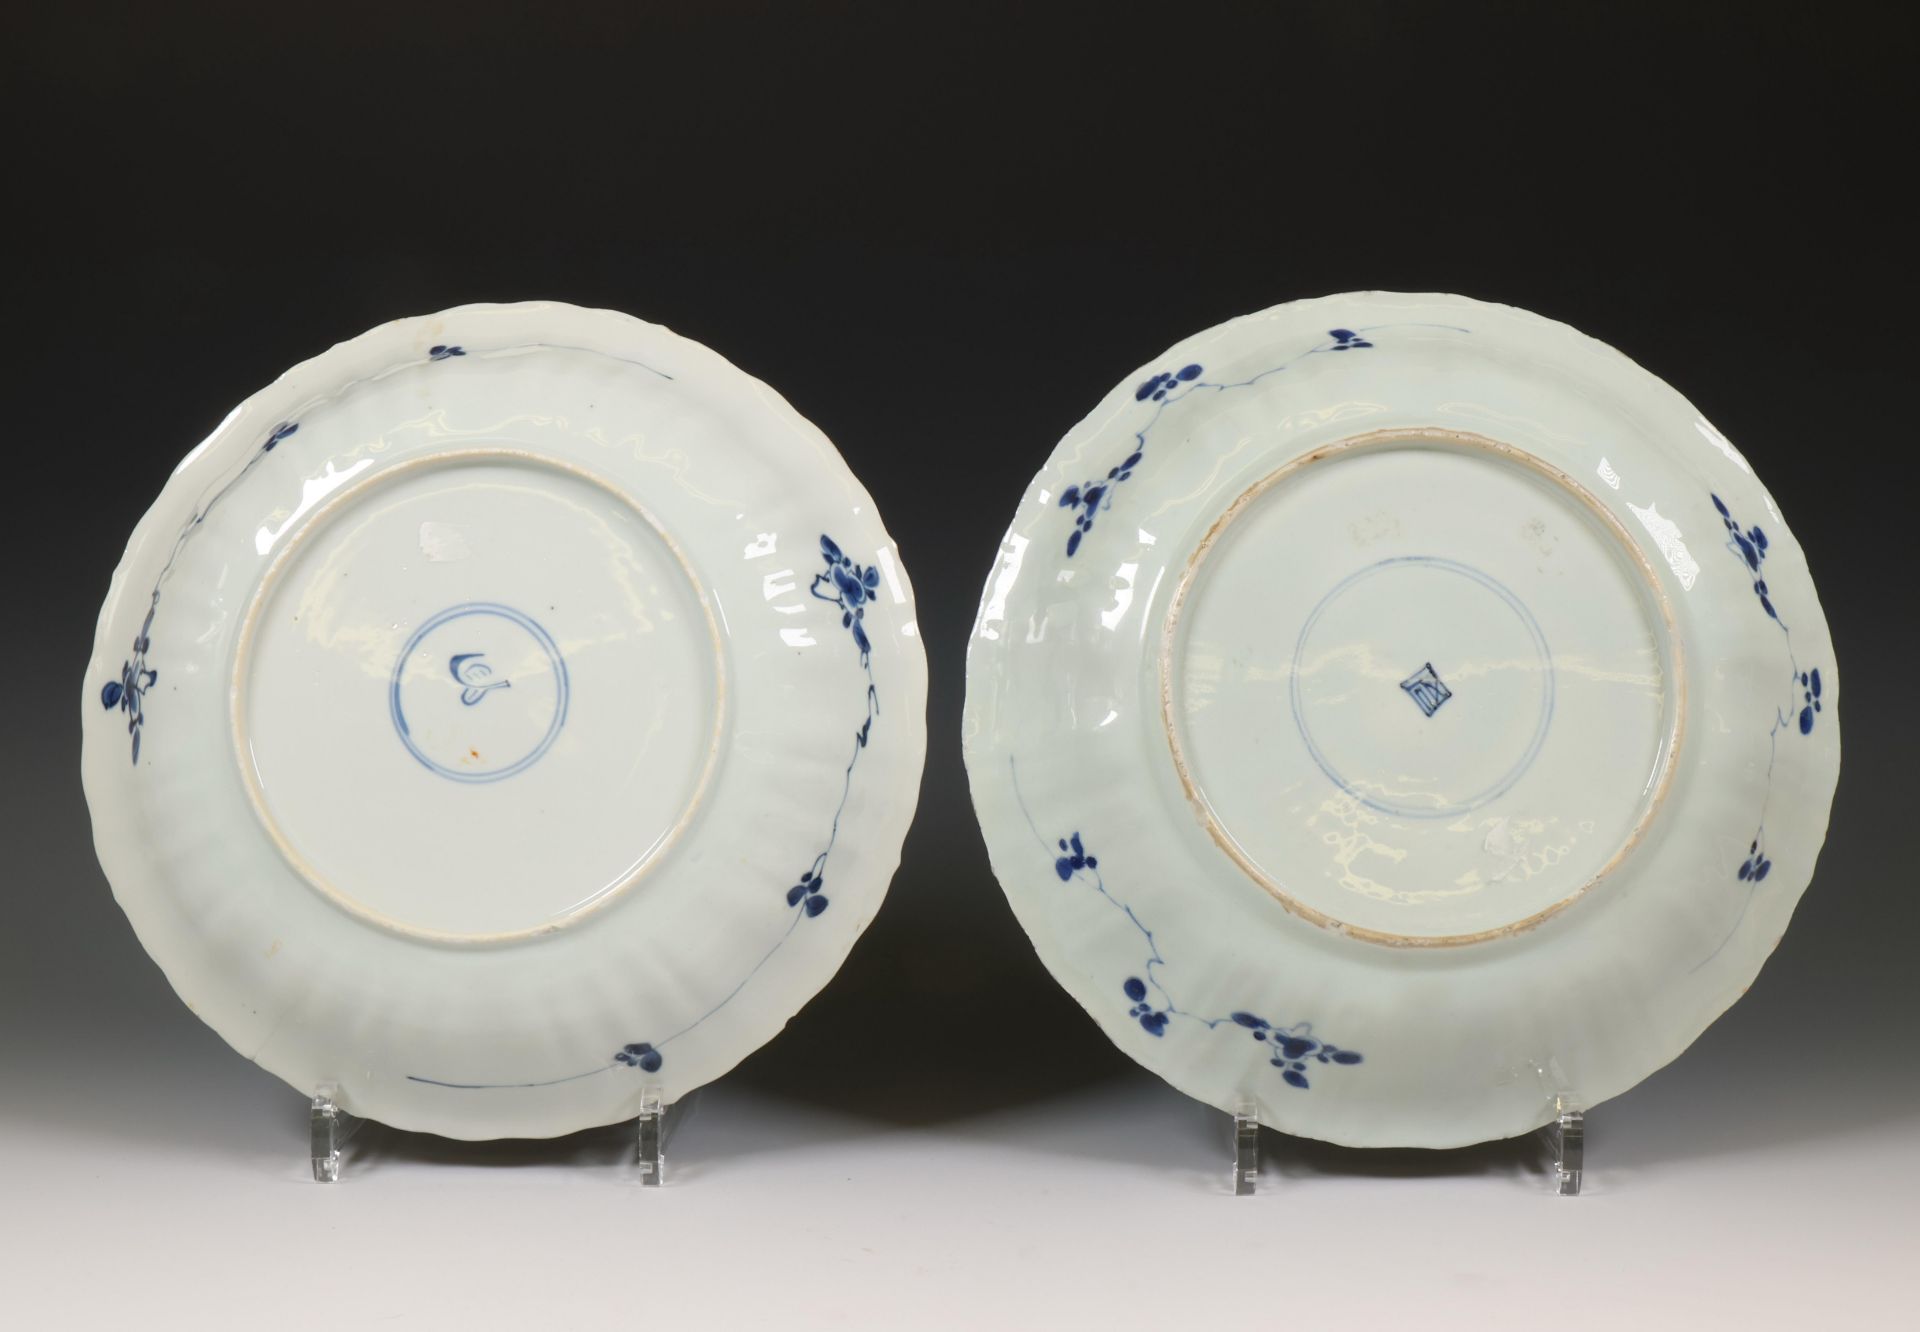 China, two blue and white porcelain plates, Kangxi period (1662-1722), - Image 2 of 3